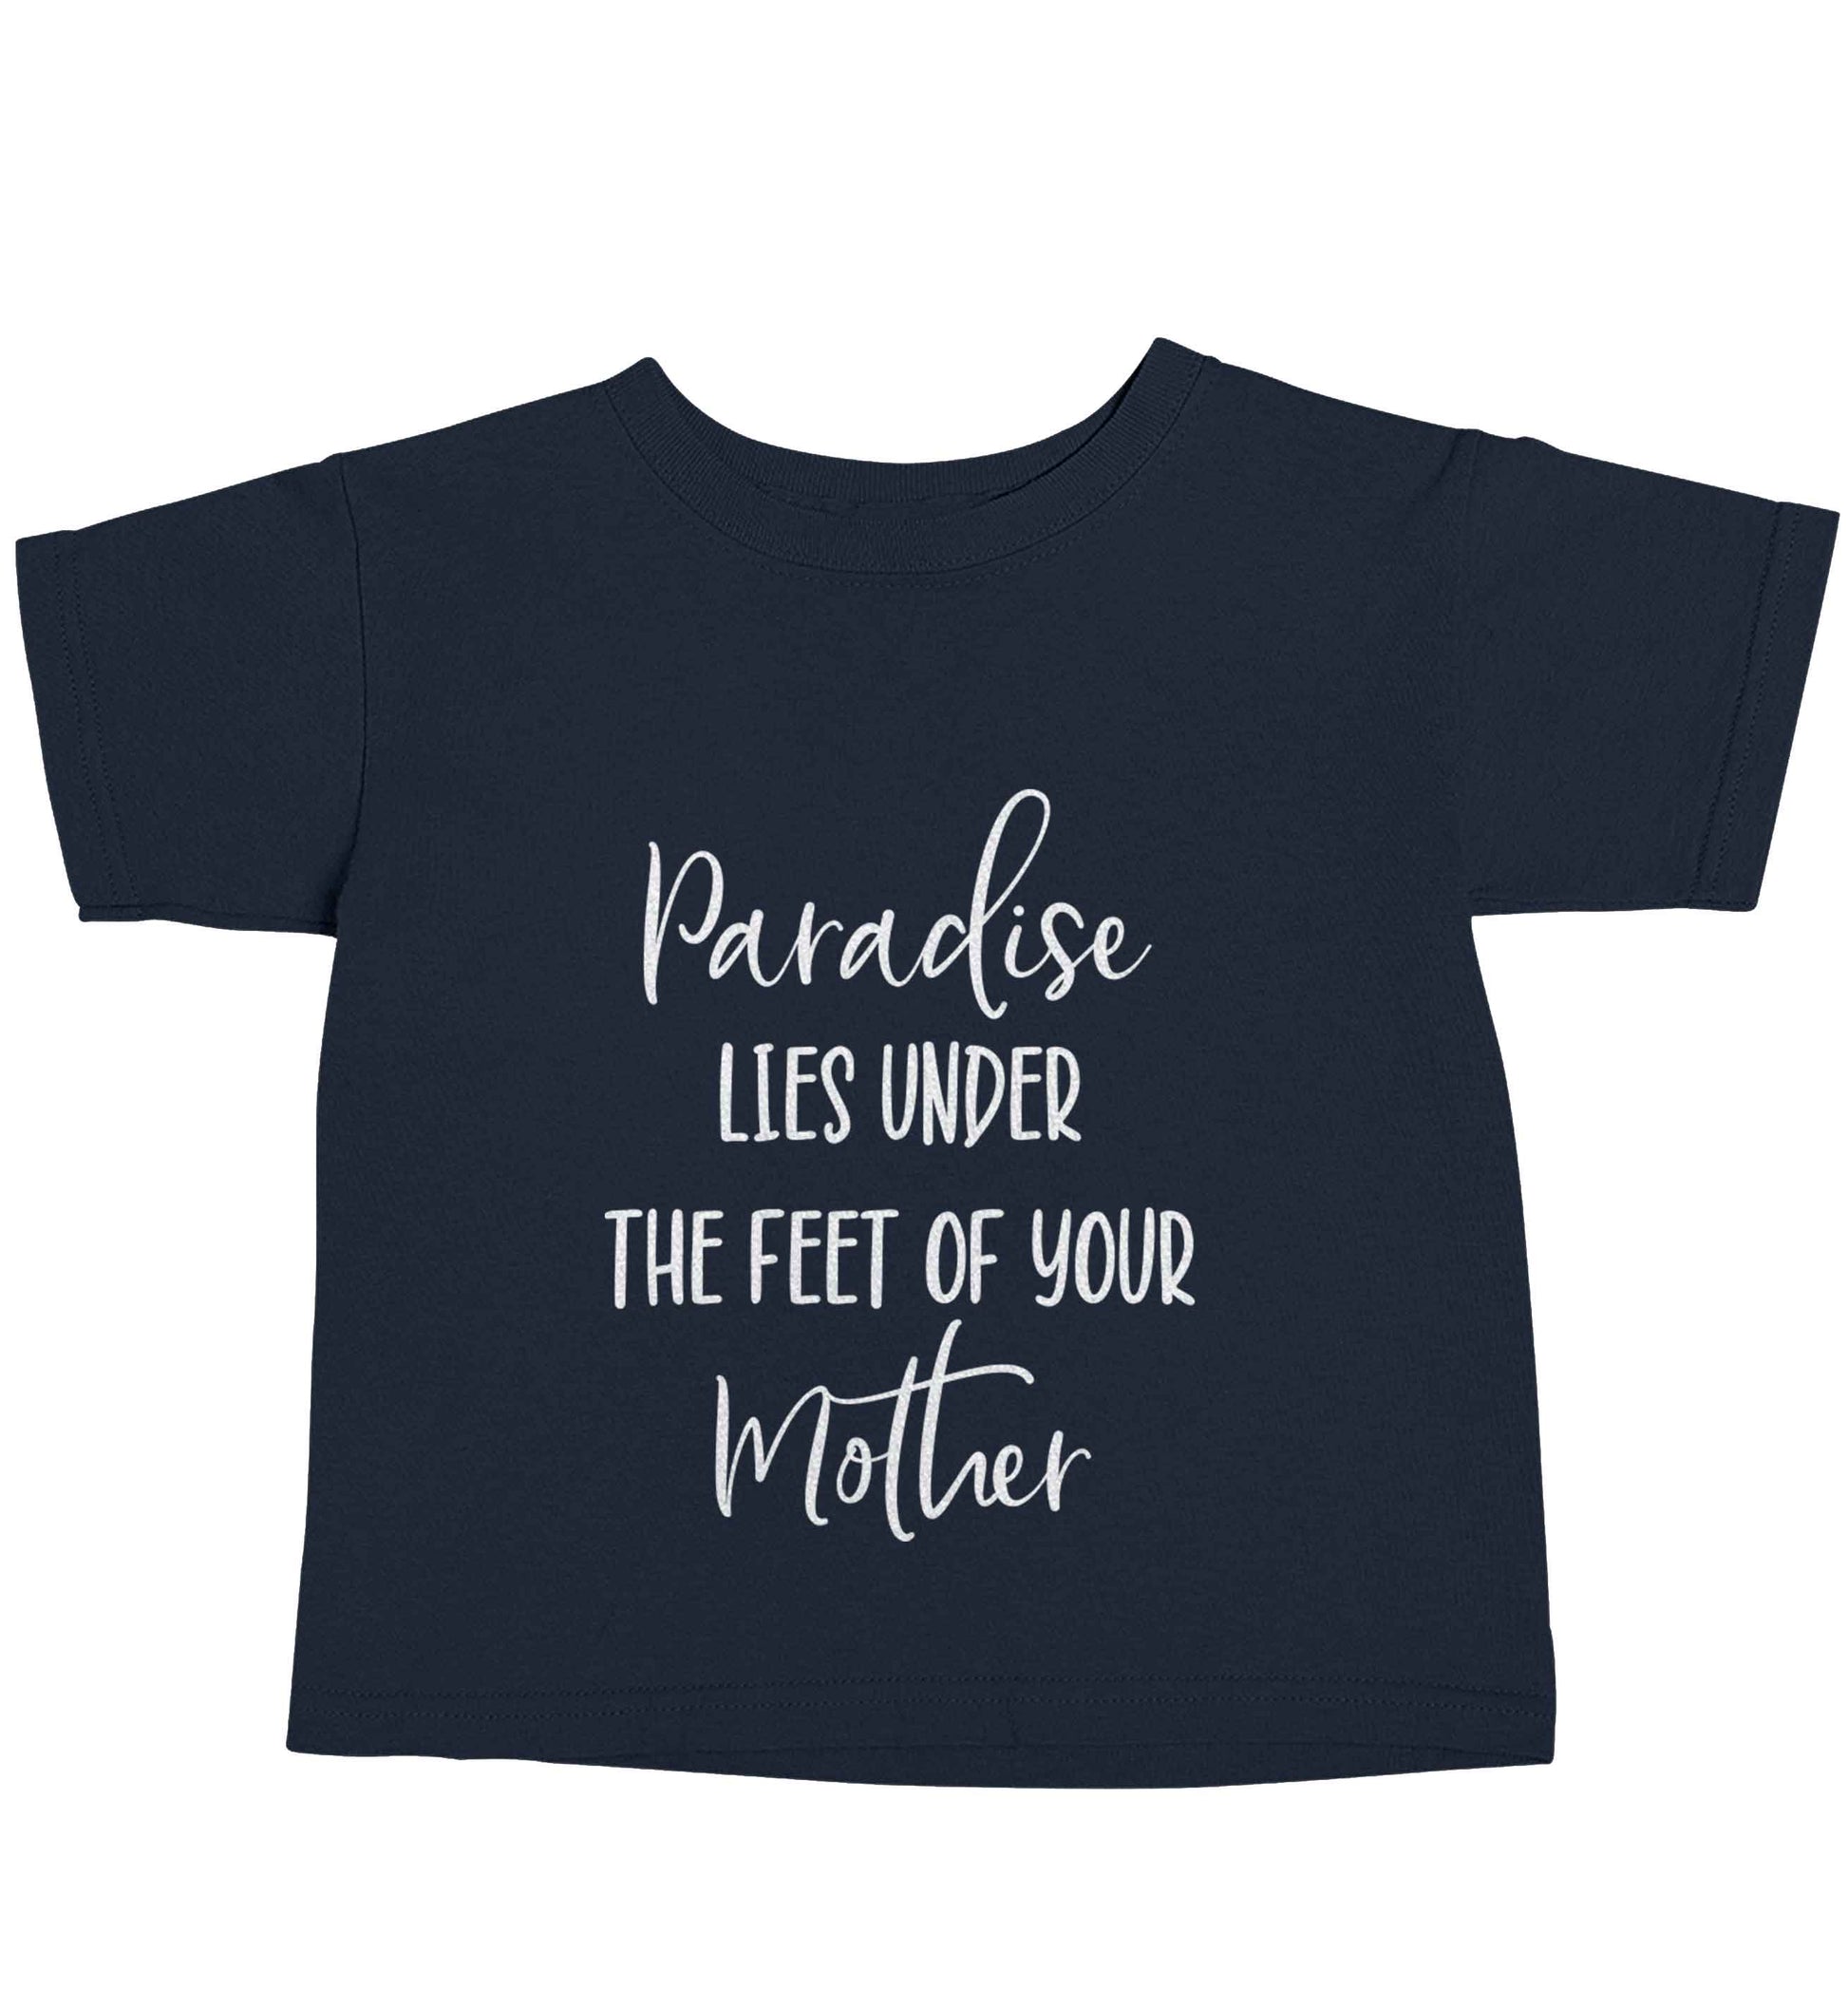 Paradise lies under the feet of your mother navy baby toddler Tshirt 2 Years